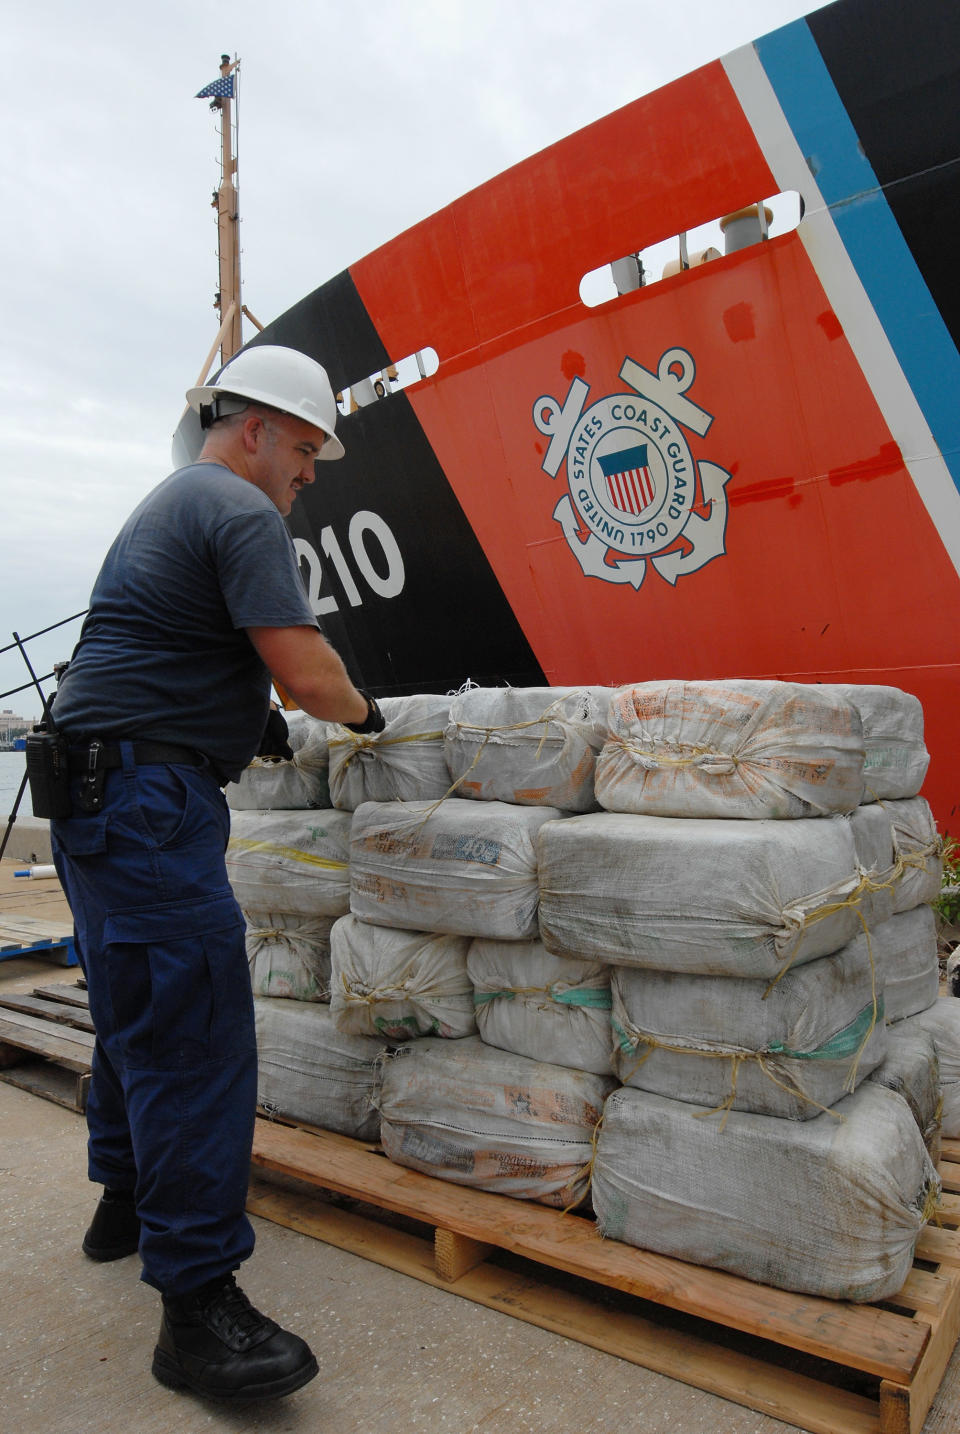 US Coast Guard Finds 7 Tons Of Cocaine On Self-Propelled Semi-Submersible